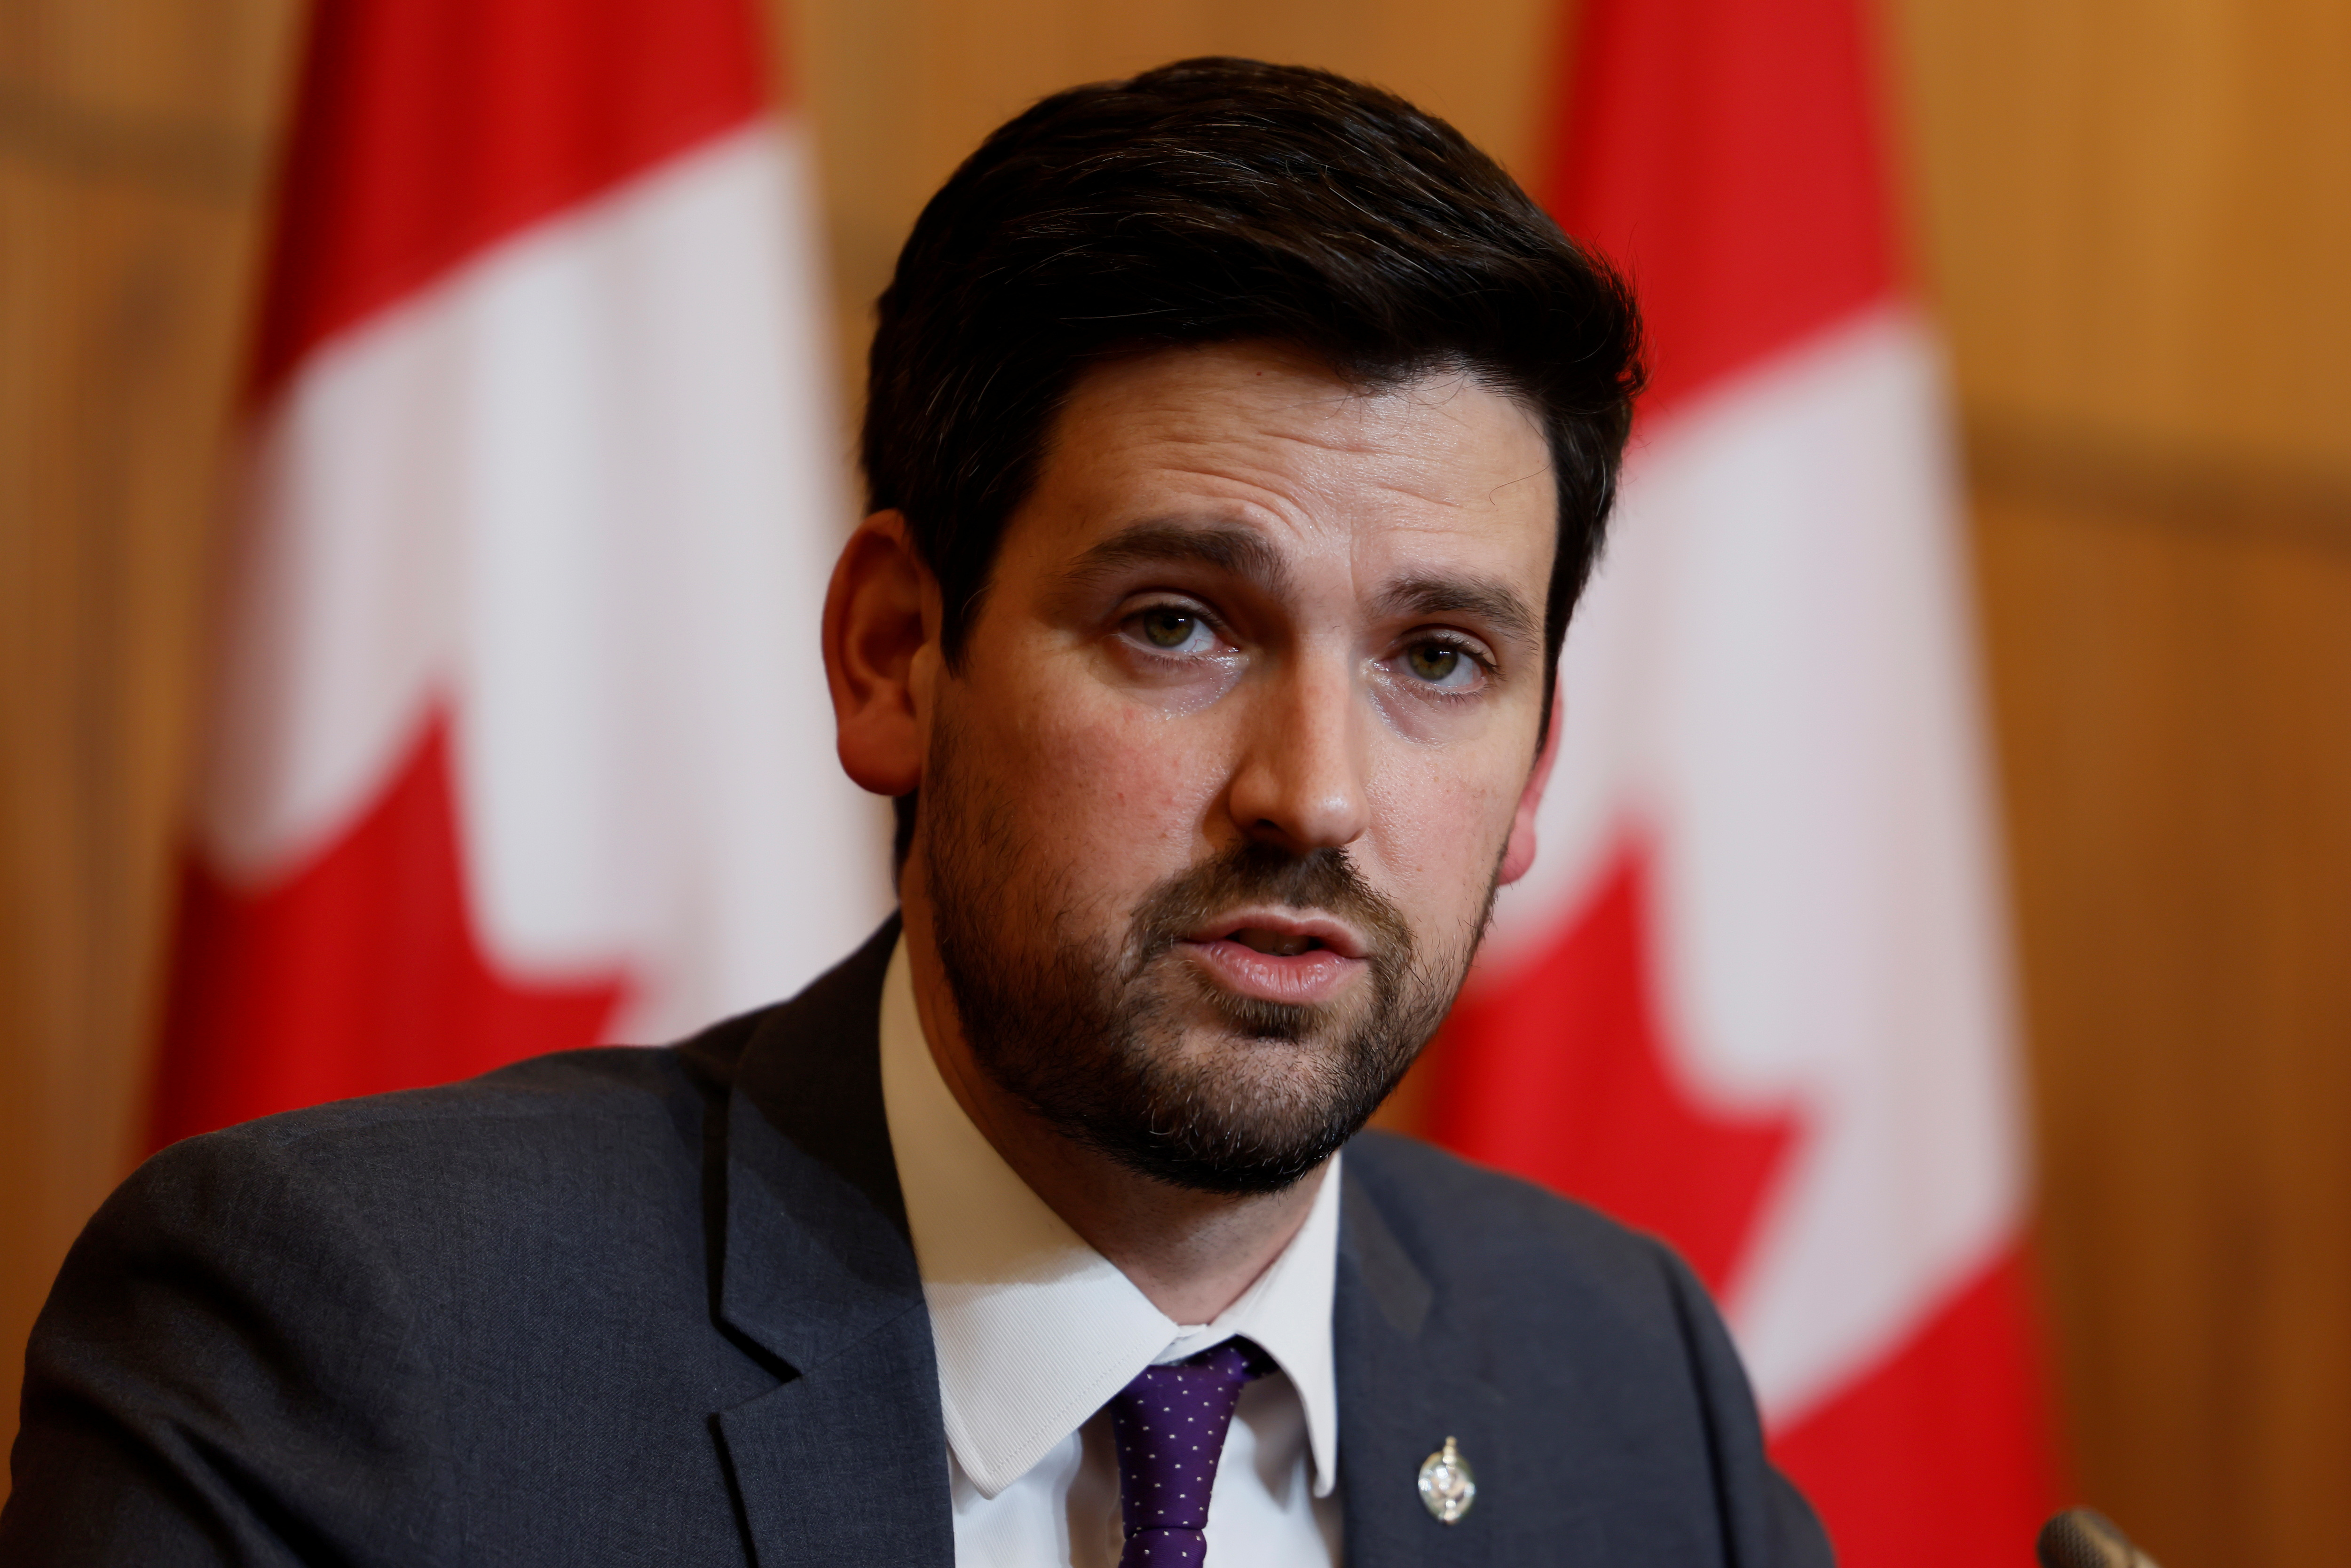 Canada’s Minister of Immigration, Refugees and Citizenship Sean Fraser attends a press conference with United Nations High Commissioner for Refugees Filippo Grandi in Ottawa